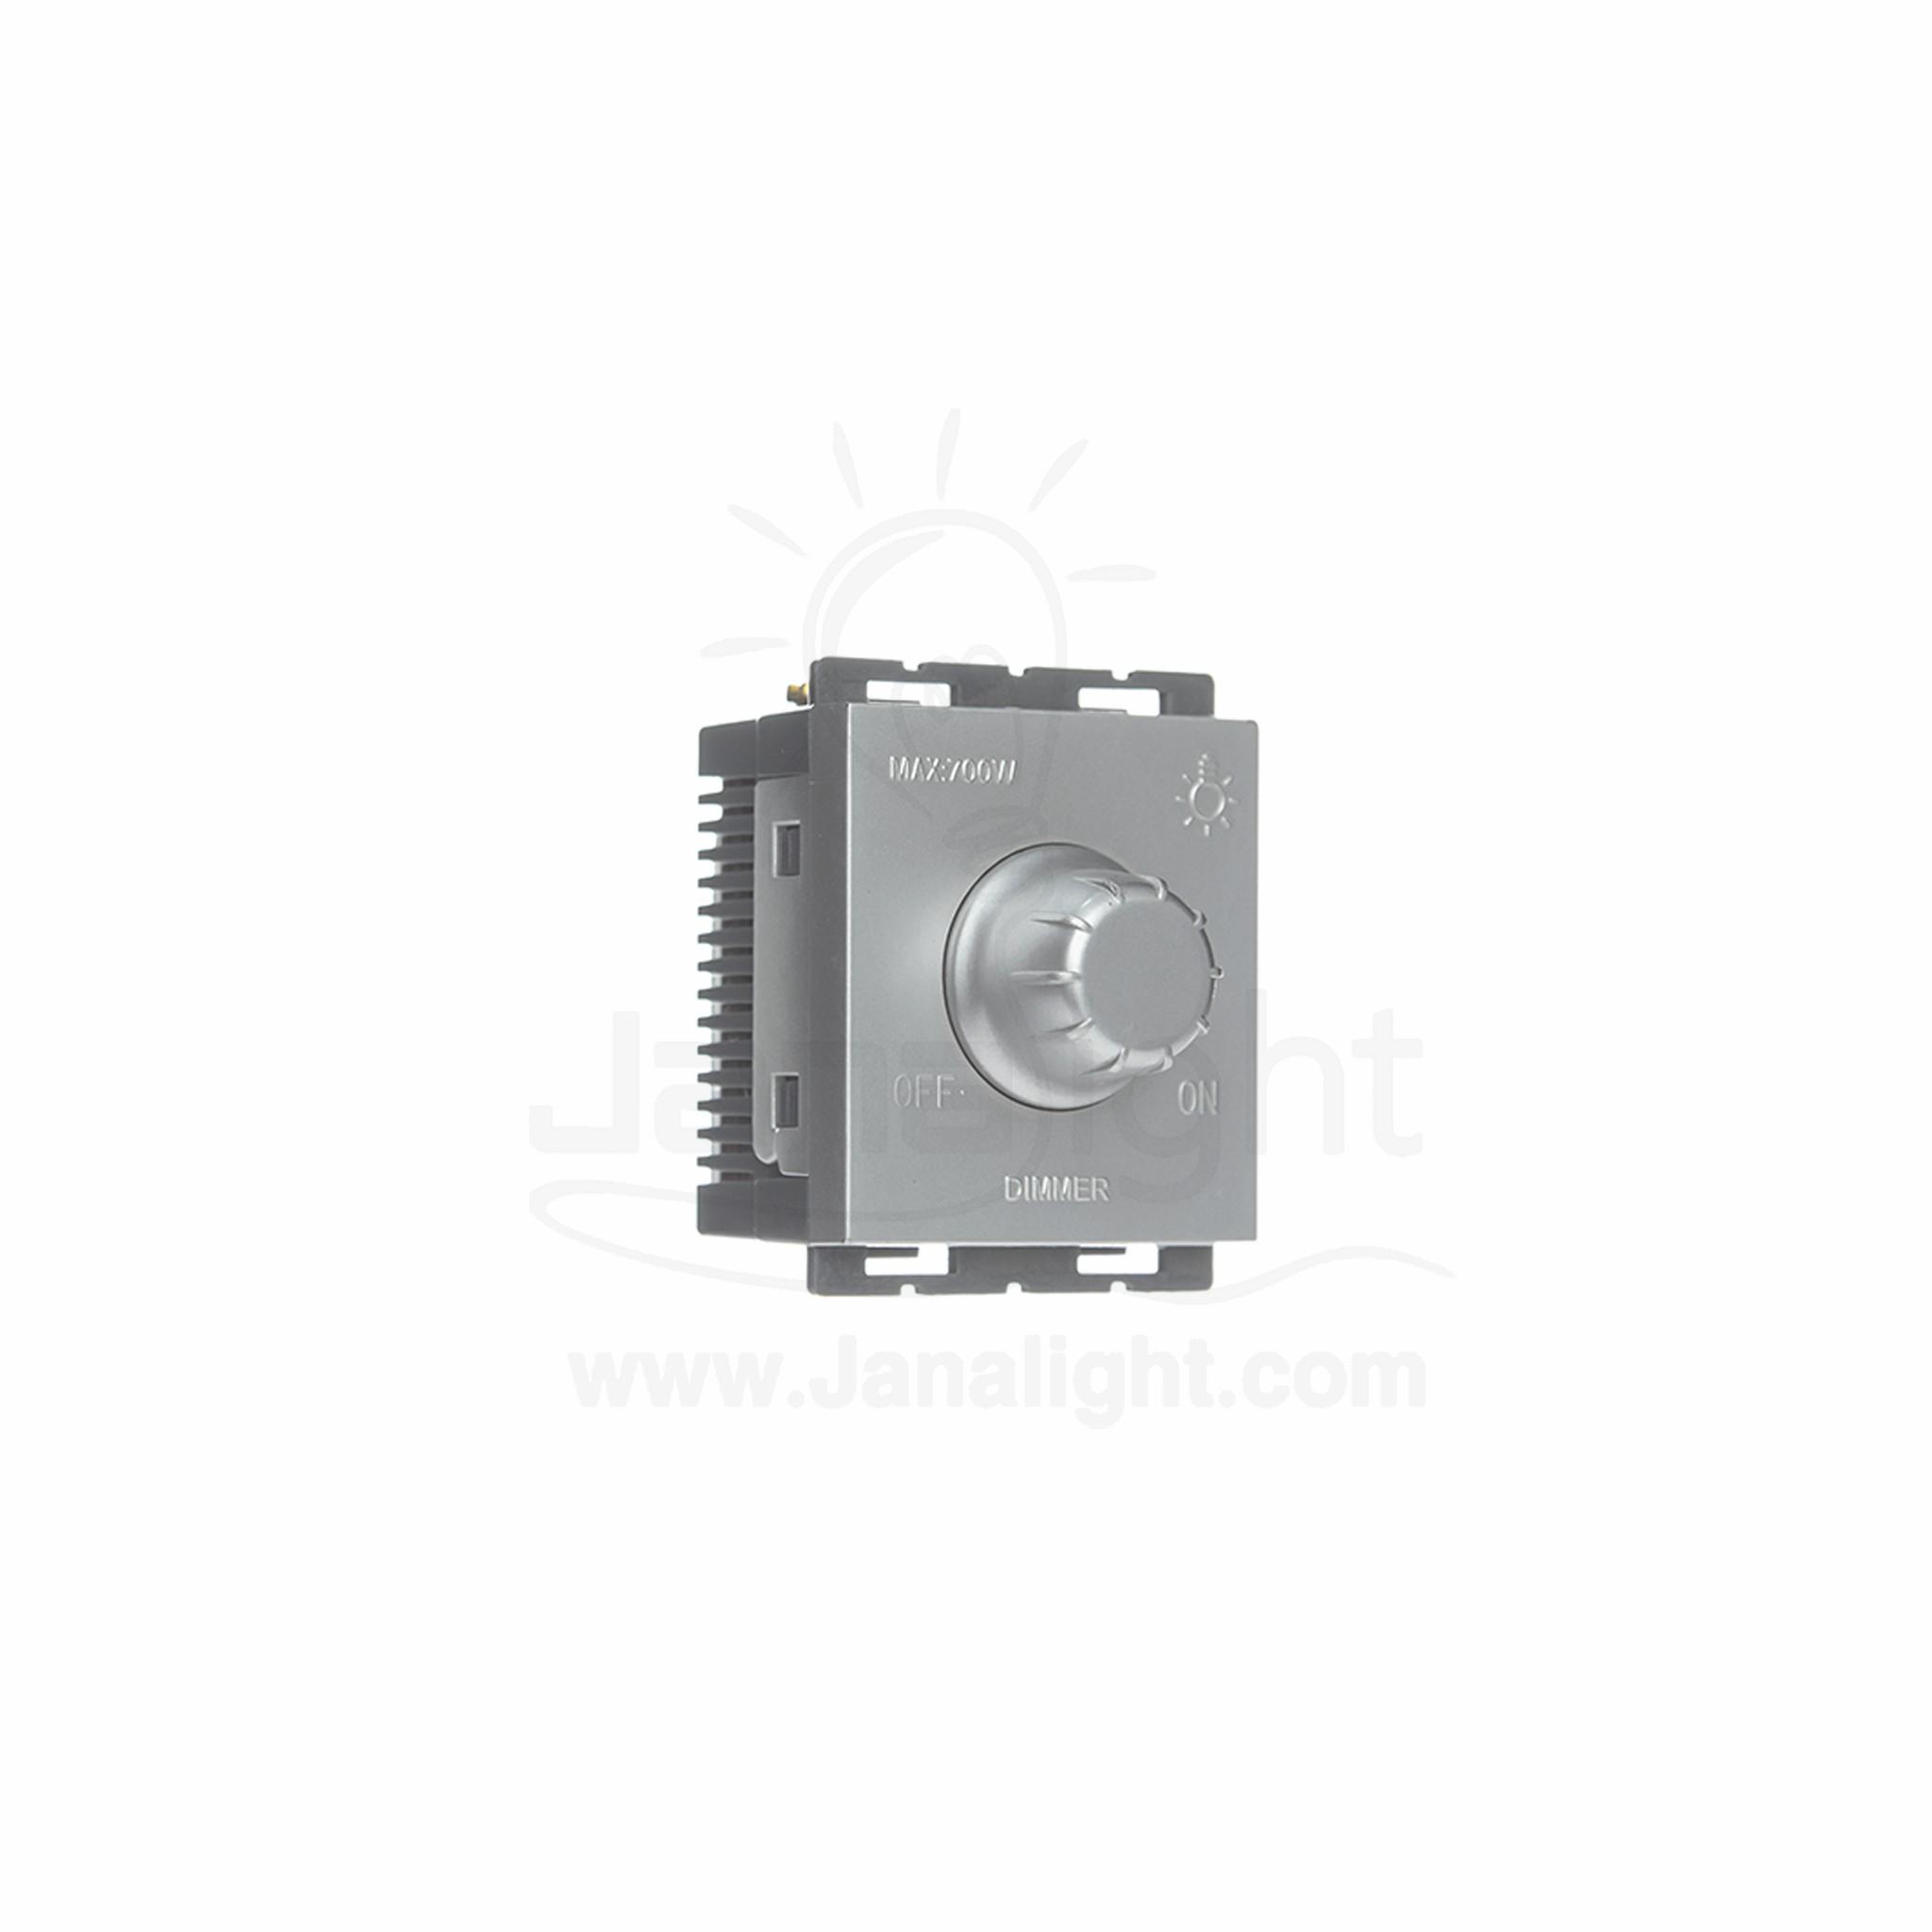 OSA دايمرانارة 700 وات فضي osa Socket Dimmers 700w For Lighting silver